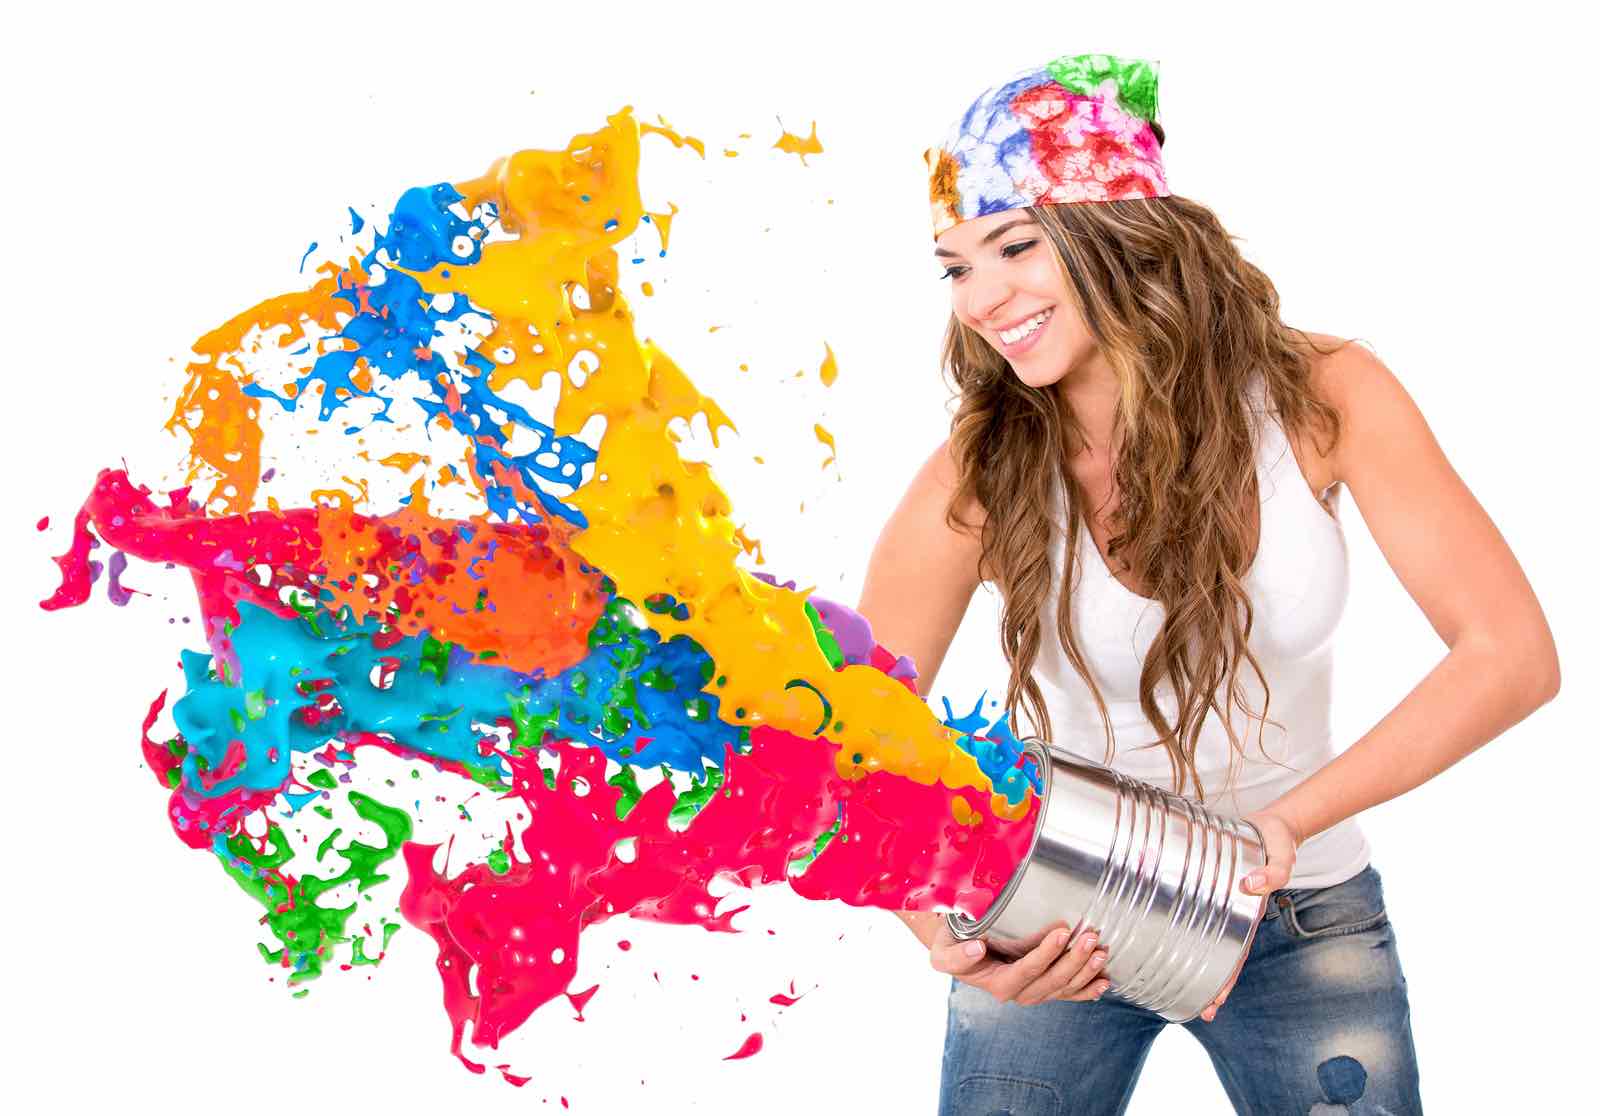 Woman splashing colorful paint from a can - isolated over white background